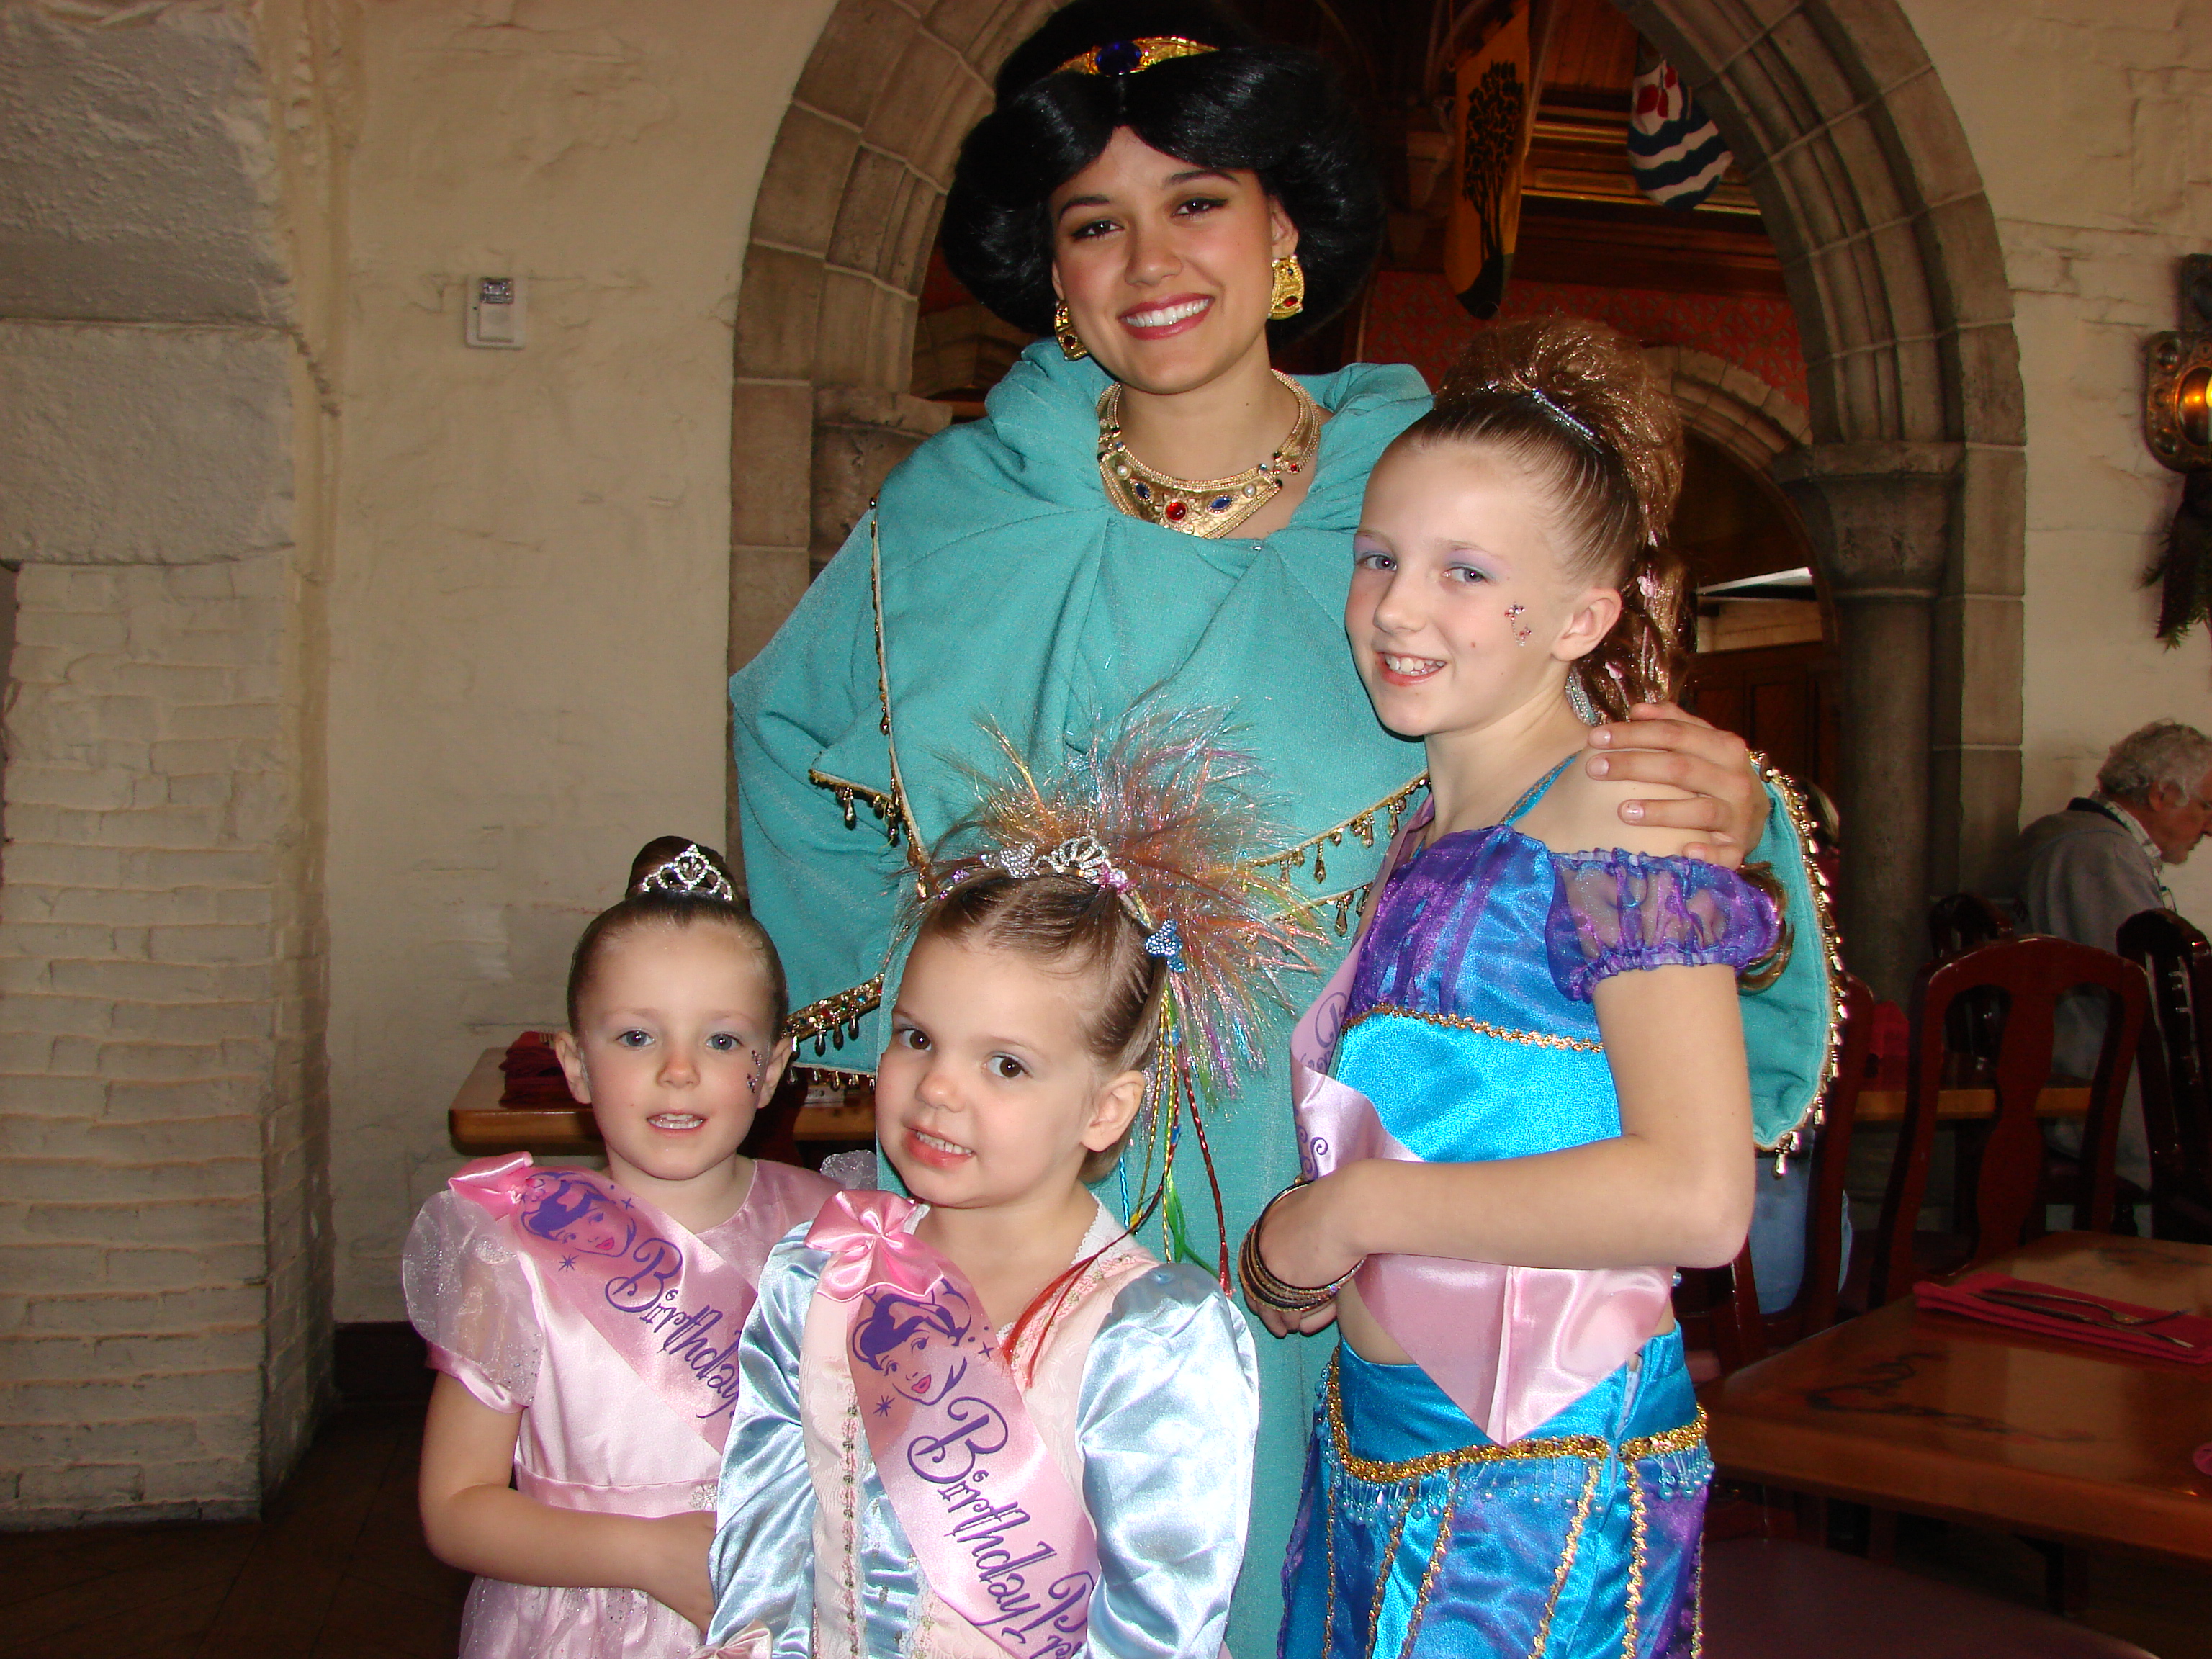 A Whole New World for these three and Jasmine ♥